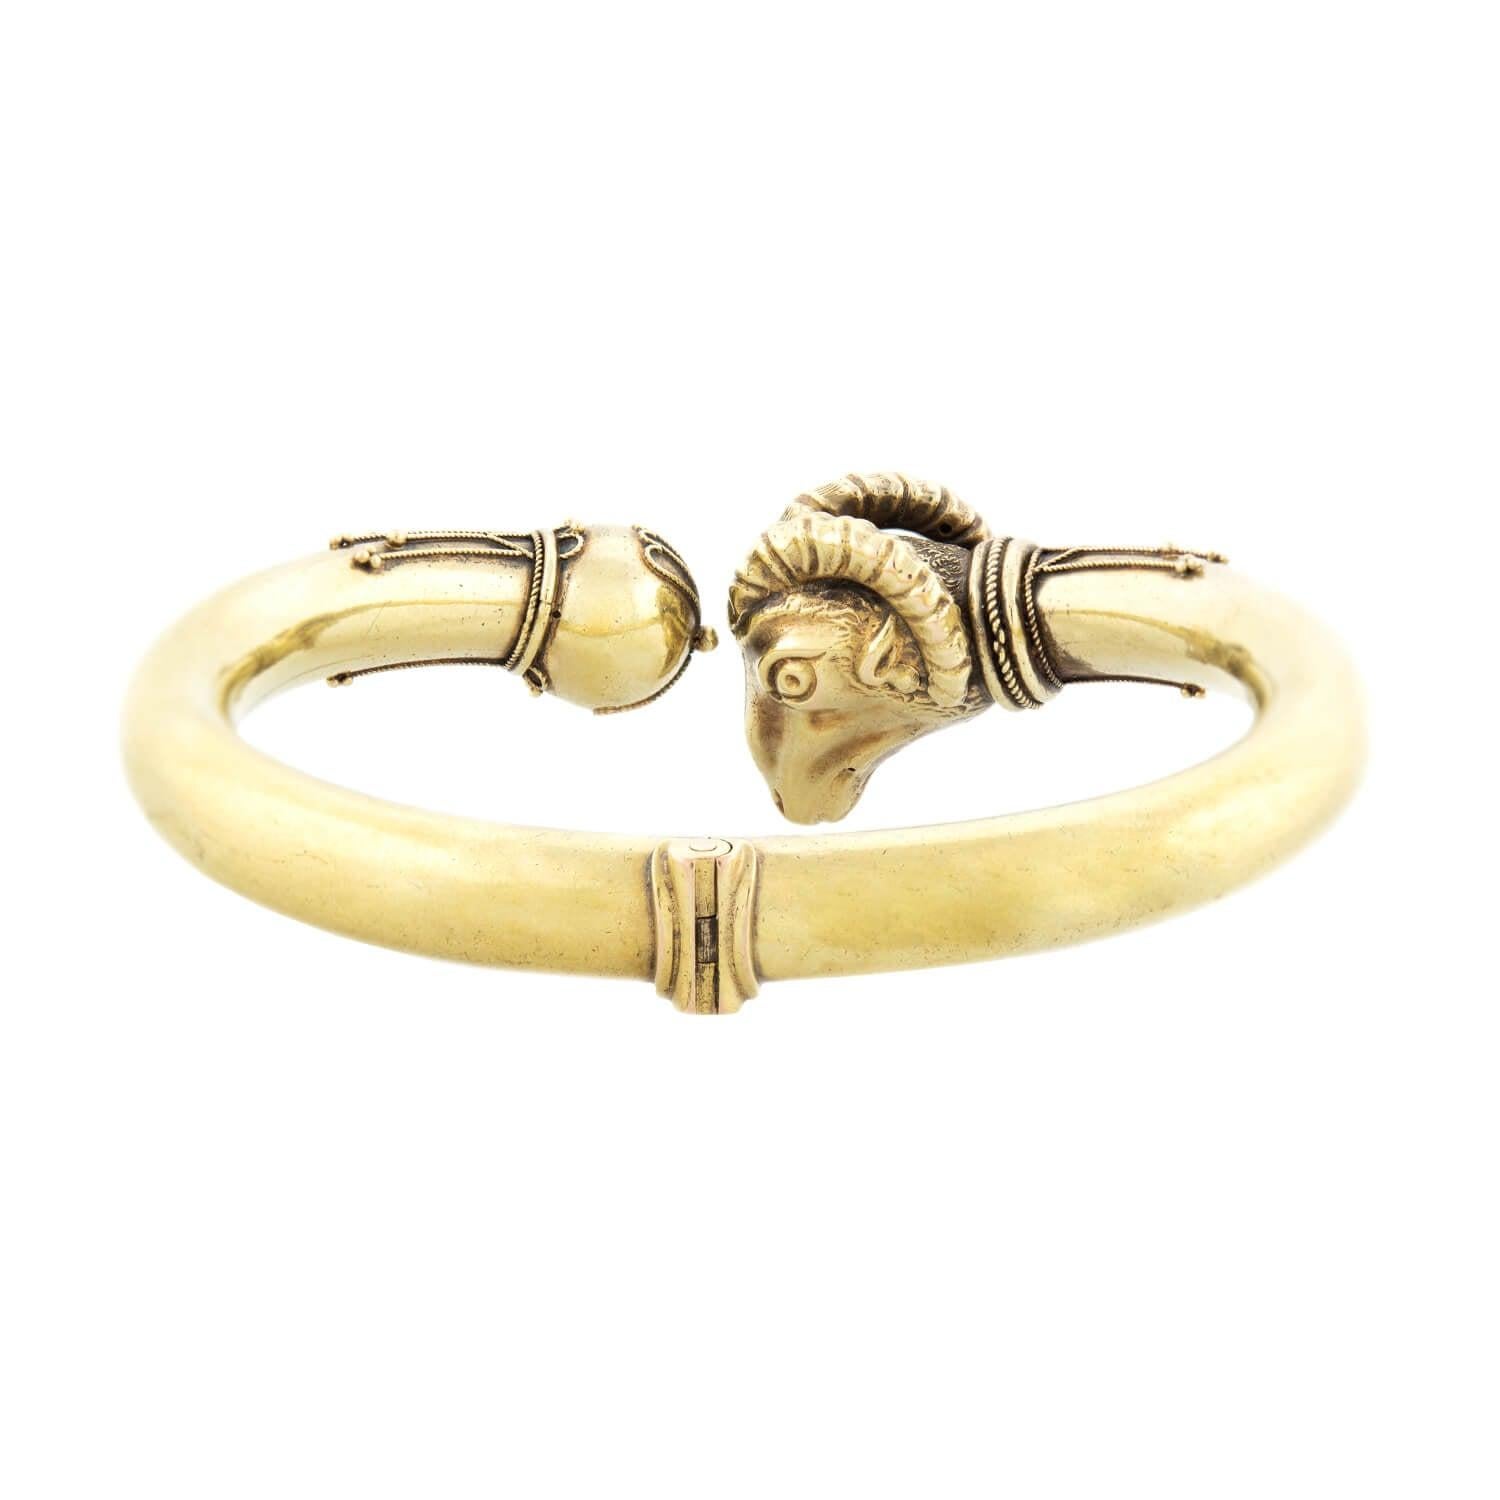 Victorian 18k Etruscan Rams Head Cuff Bracelet In Good Condition For Sale In Narberth, PA